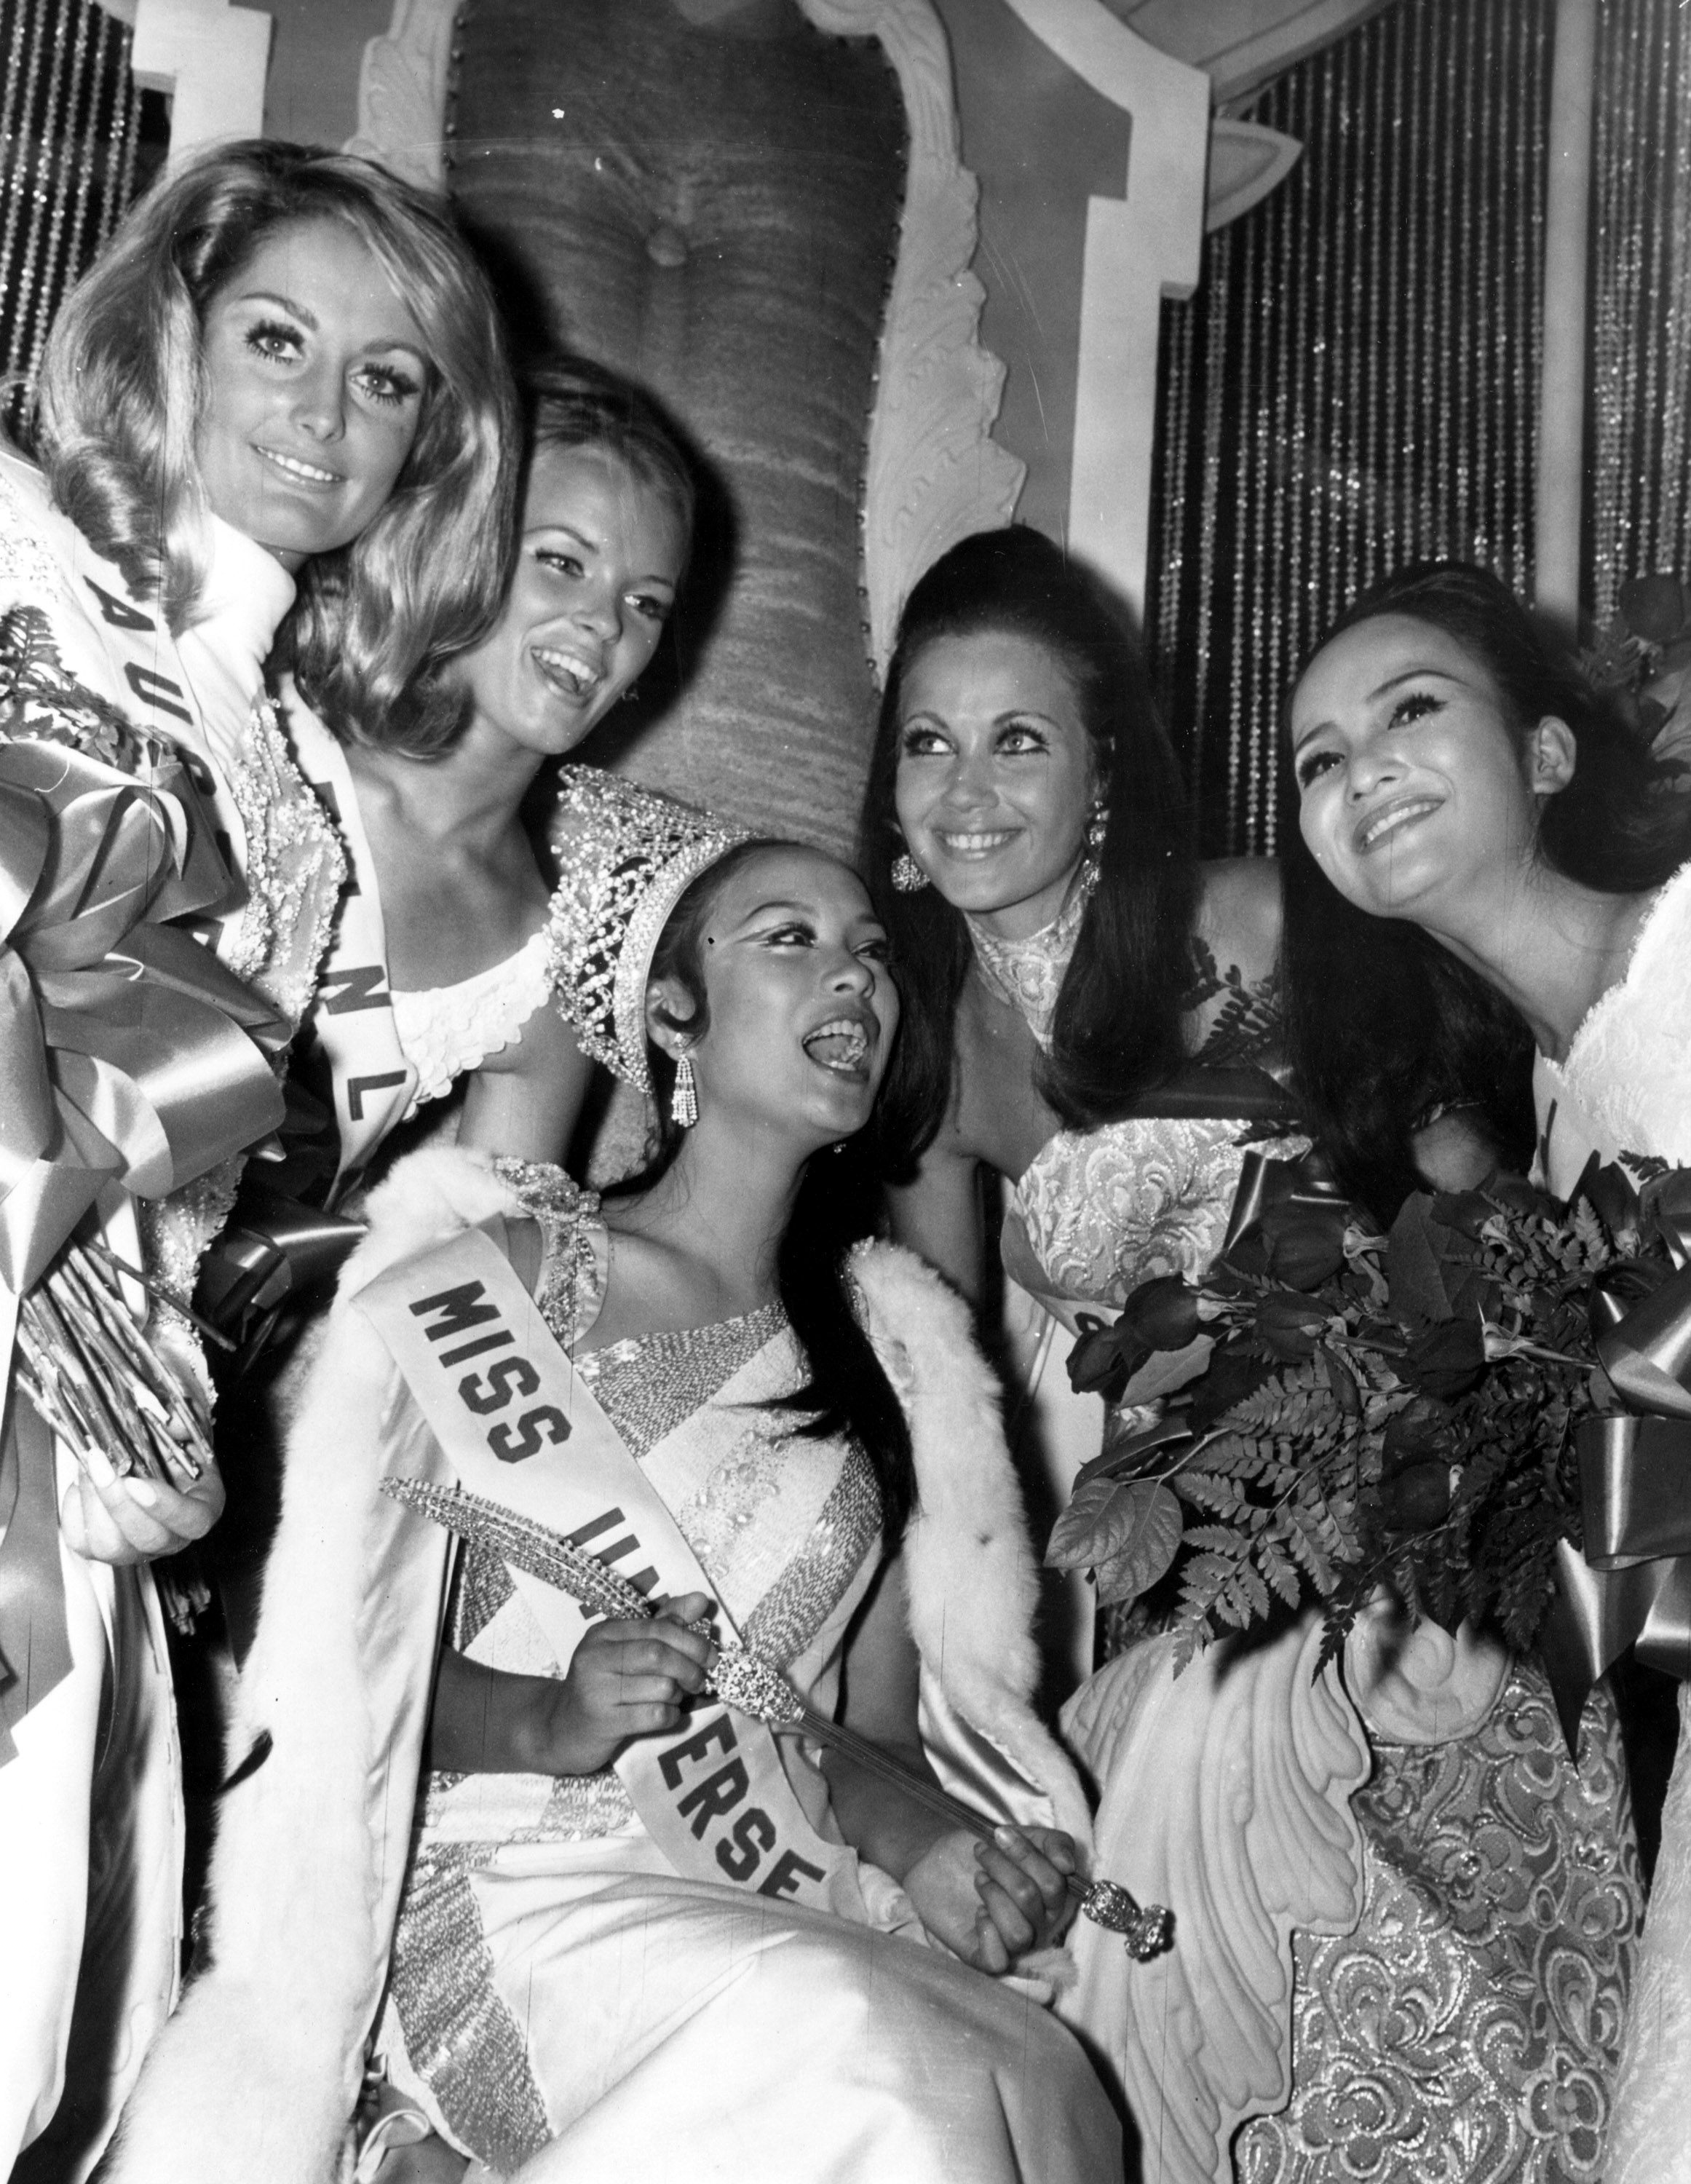 MISS UNIVERSE 1969. Gloria Diaz, Miss Universe 1969, is surrounded by well-wishers after she is crowned during the 18th edition of the pageant. Photo from Miss Universe Organization 